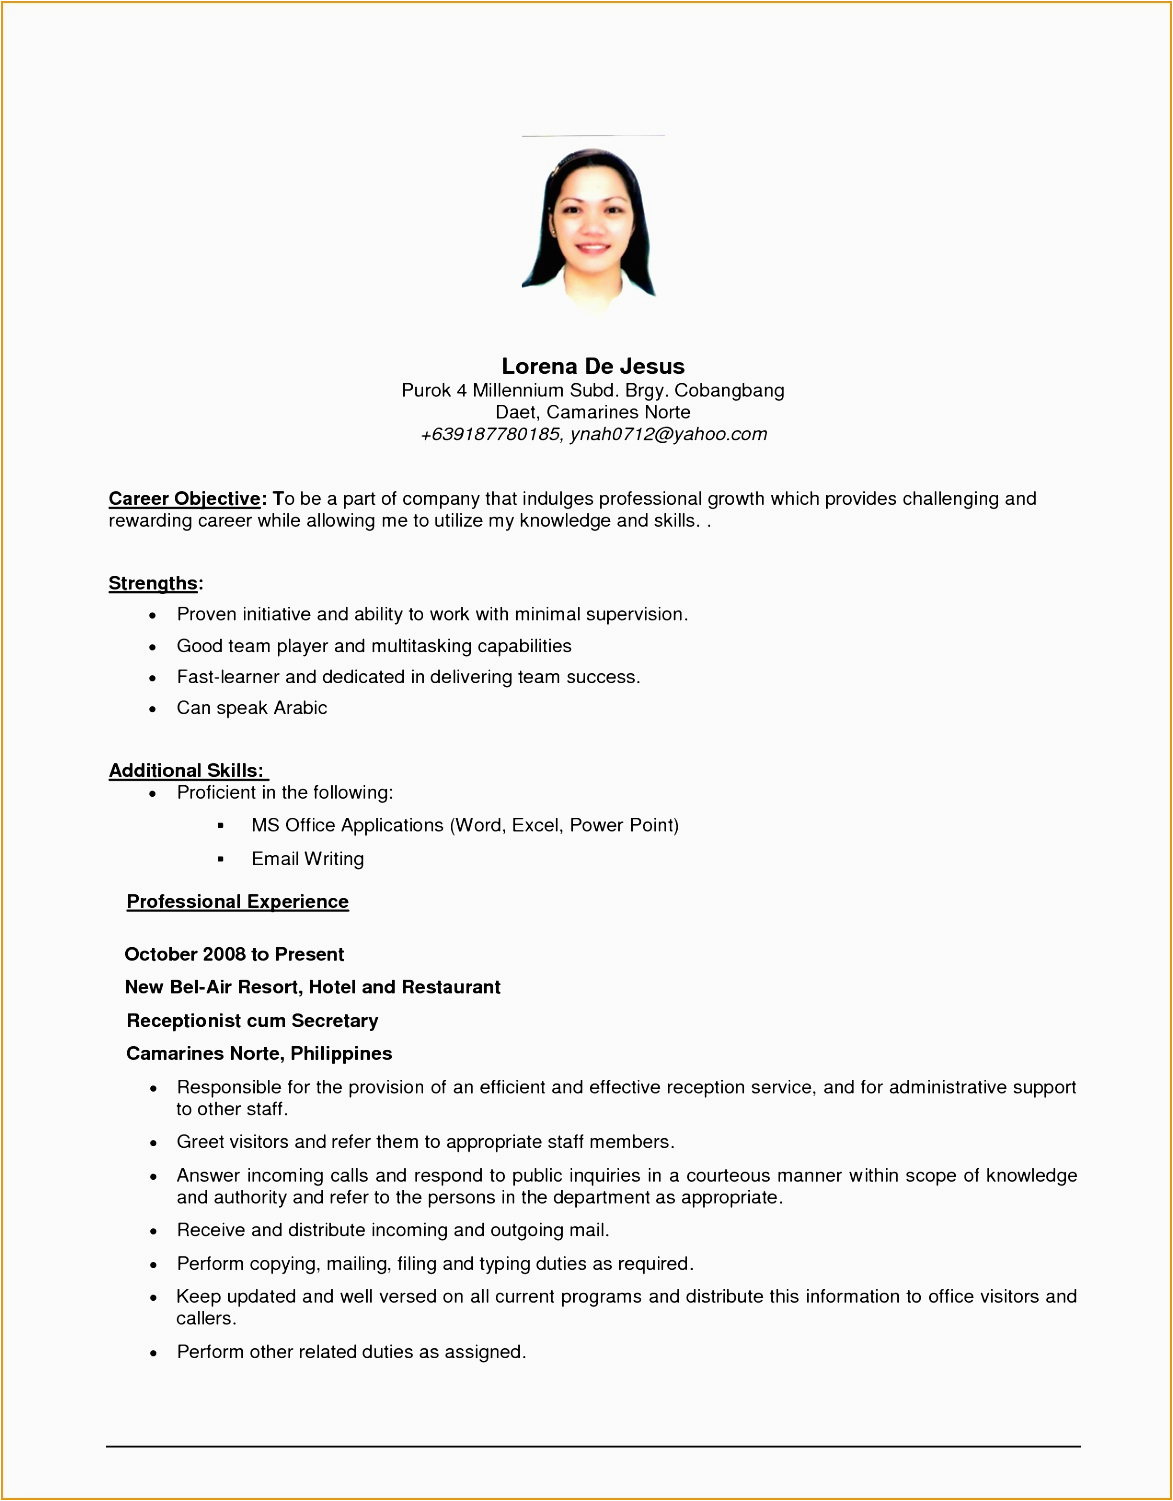 Sample Objective Statements for General Resumes 4 Resume Objective Statement for Teacher